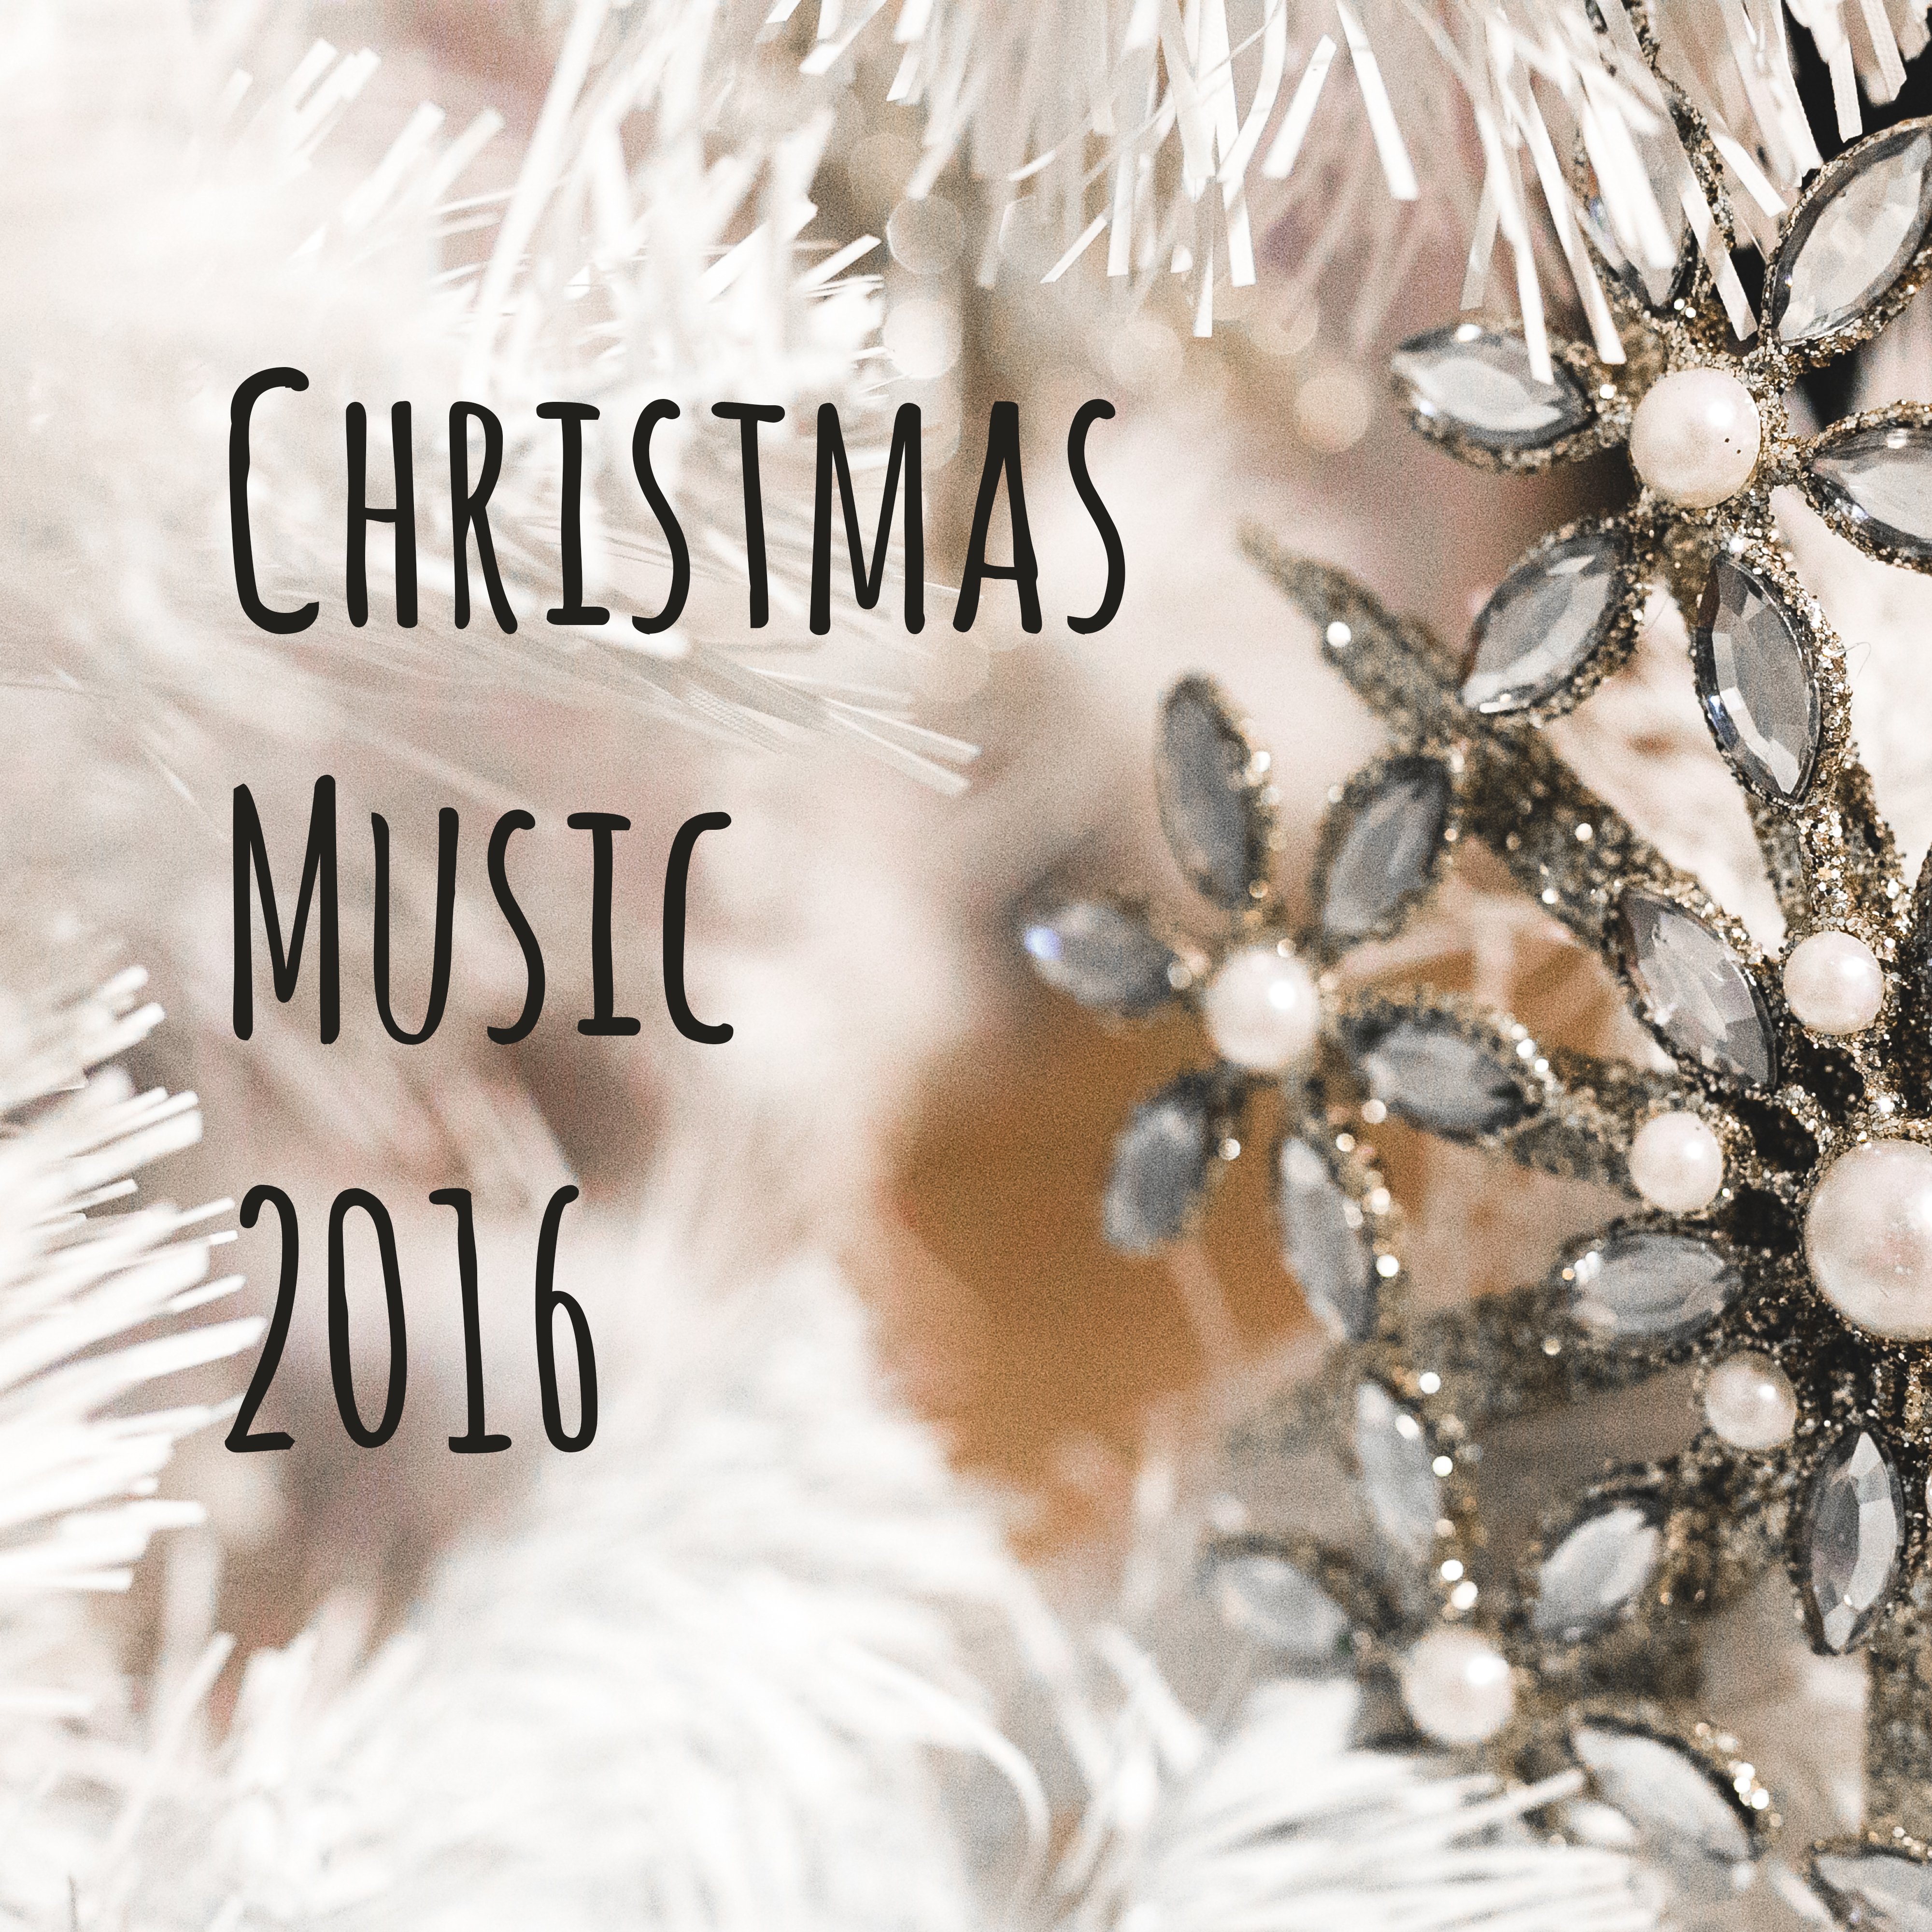 Christmas Music 2016 – Best Songs for Christmas Time, Magical Atmosphere